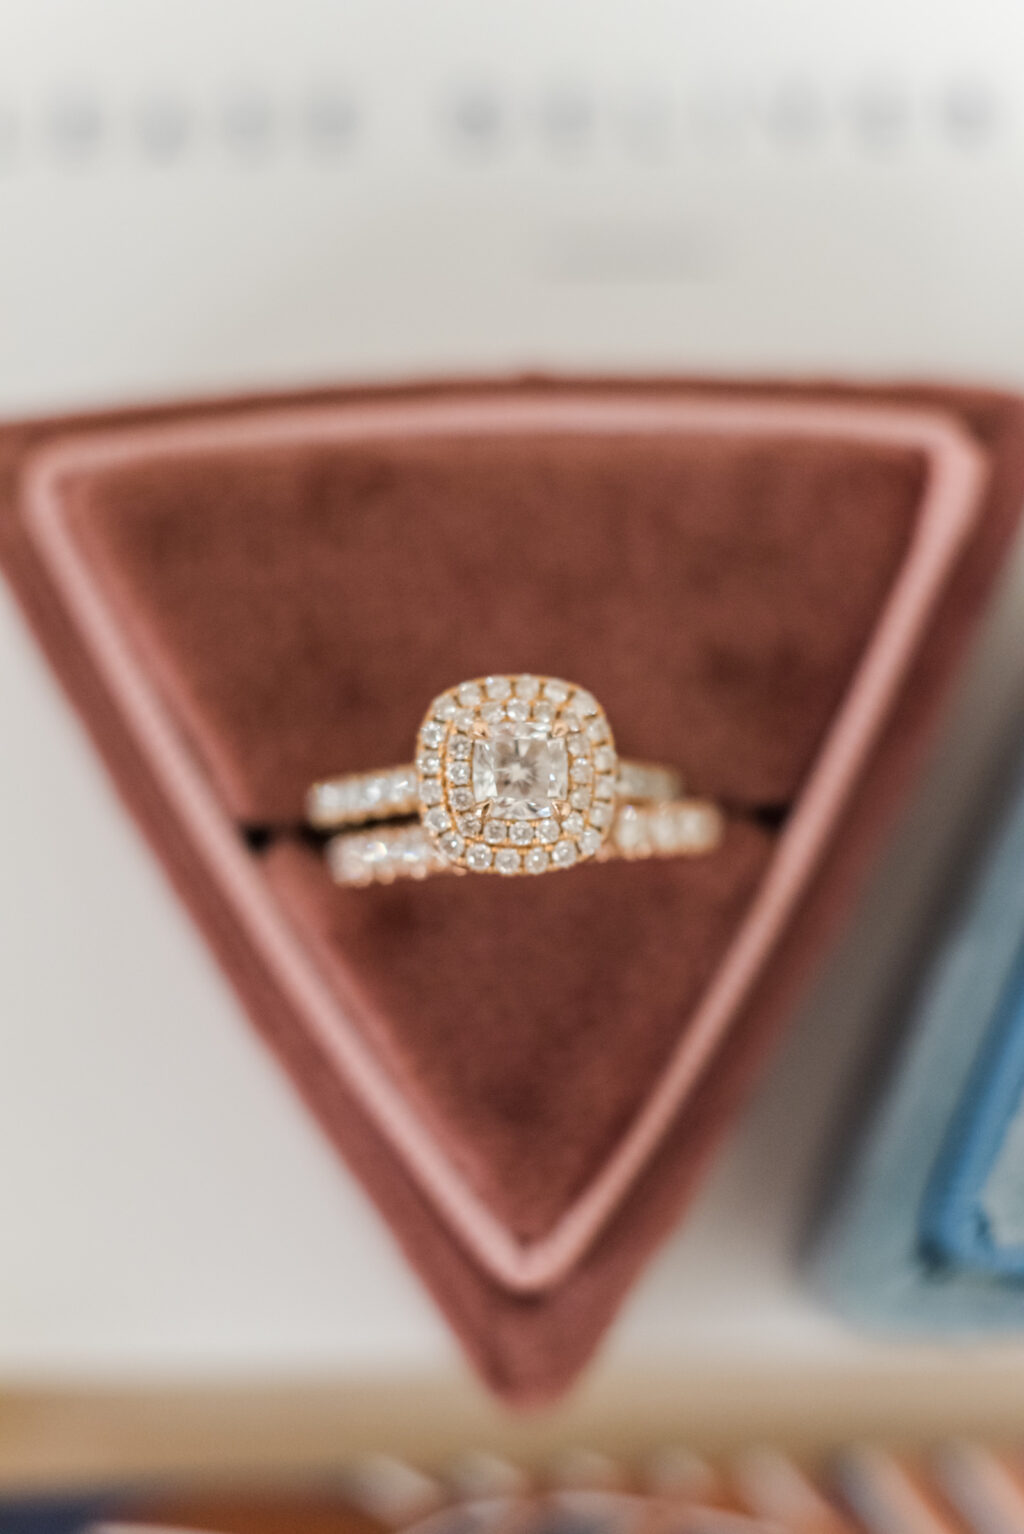 Diamond Engagement Ring with Double Halo and Gold Diamond Wedding Band in Ring Box